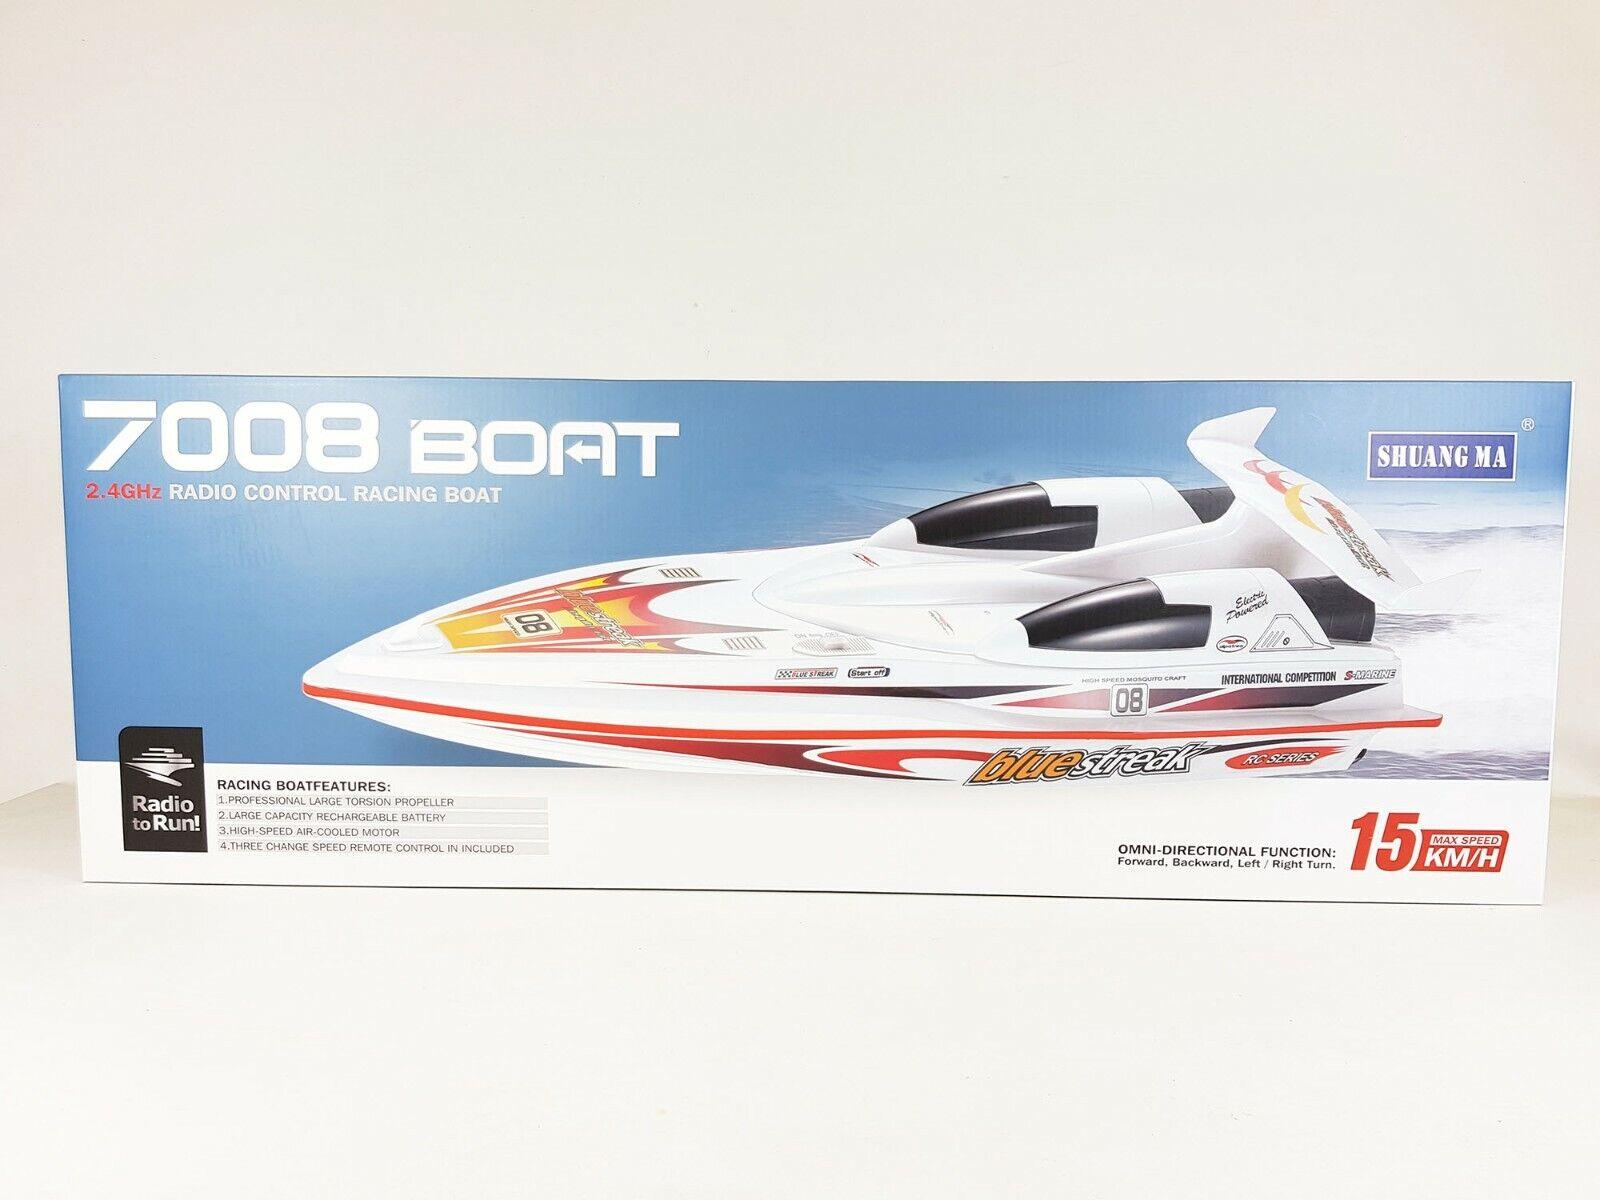 7008 Rc Boat: Long-lasting battery and convenient charging for the 7008 RC boat